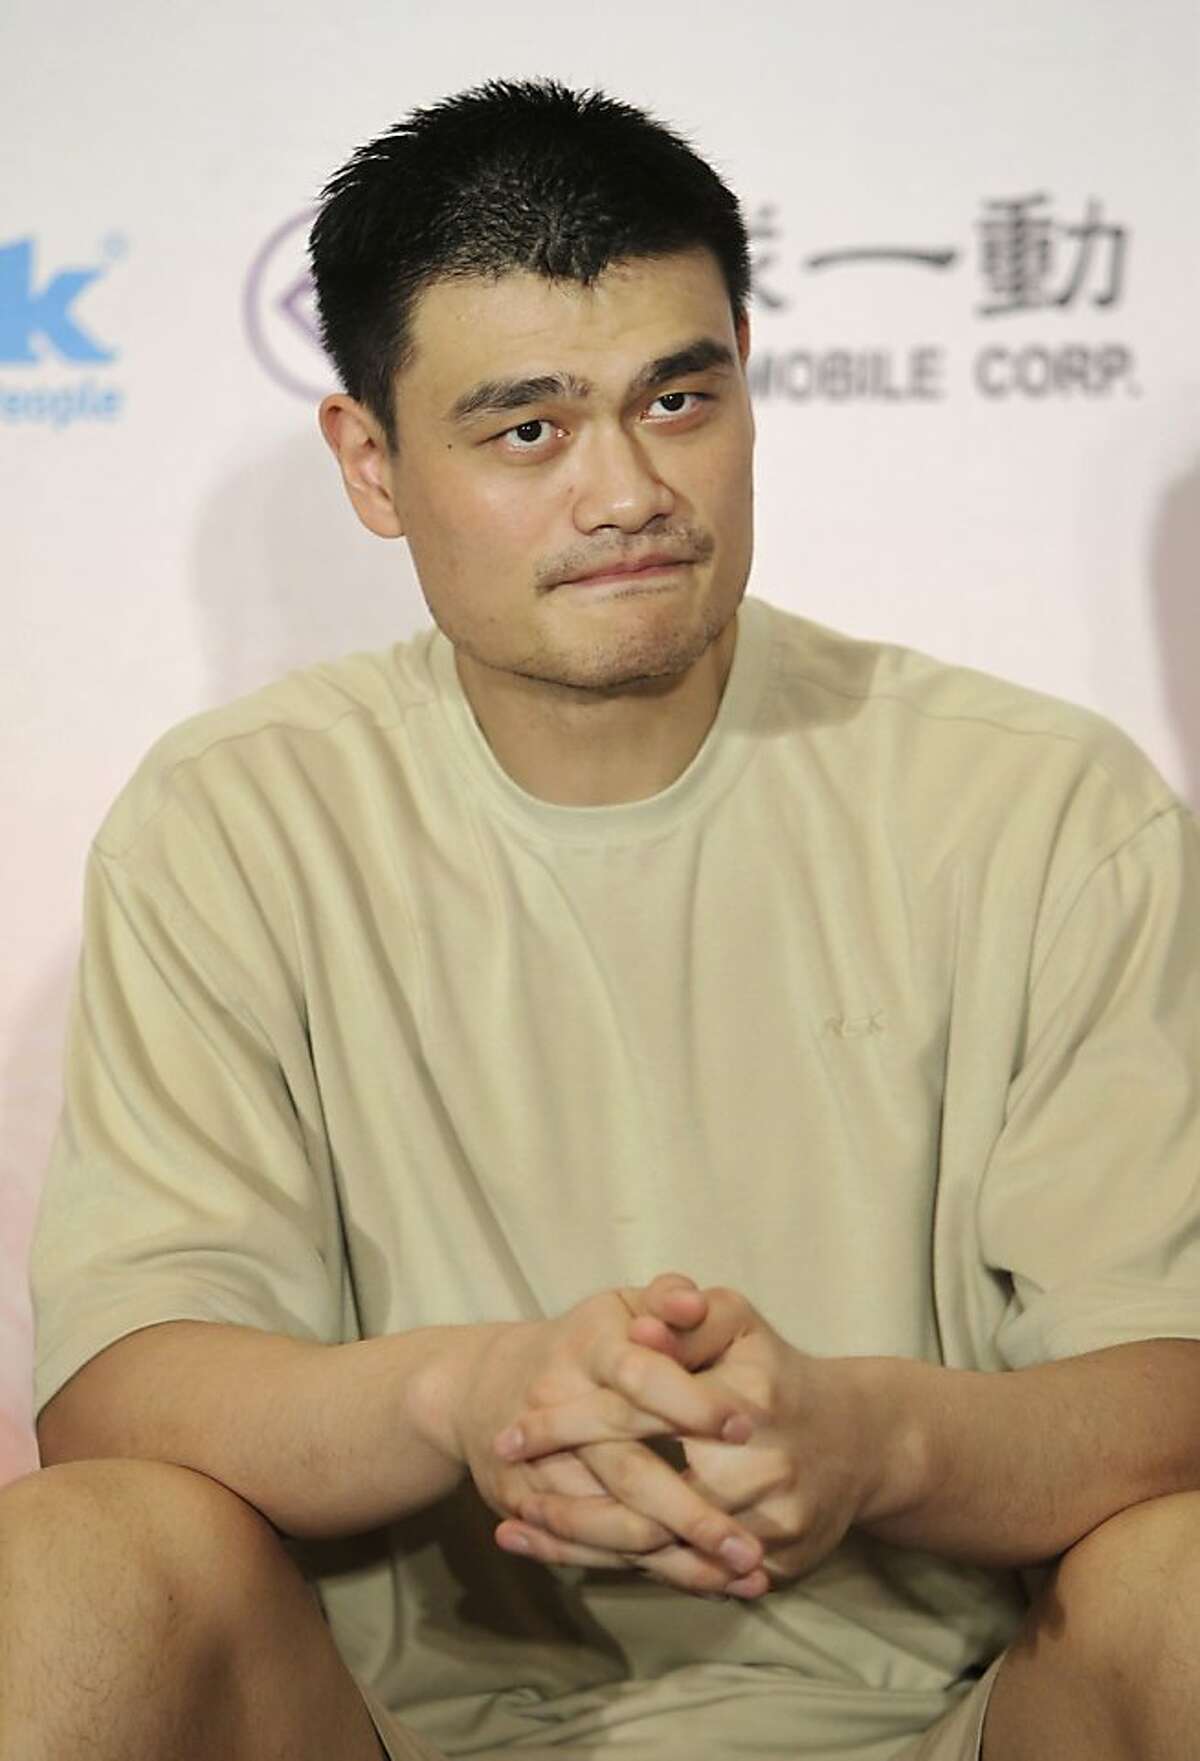 NBA Houston Rockets Yao Ming attends a media event announcing his personal Yao Foundation Charity Tour in Taipei, Taiwan, Tuesday, July 27, 2010. Yao, along with other NBA players will hold charity games against local pop icons and basketball players Wednesday, July 28. (AP Photo/Wally Santana) Ran on: 07-28-2010 Photo caption Dummy text goes here. Dummy text goes here. Dummy text goes here. Dummy text goes here. Dummy text goes here. Dummy text goes here. Dummy text goes here. Dummy text goes here.###Photo: names28_PH_yaoming1280102400AP###Live Caption:NBA Houston Rockets Yao Ming attends a media event announcing his personal Yao Foundation Charity Tour in Taipei, Taiwan, Tuesday, July 27, 2010. Yao, along with other NBA players will hold charity games against local pop icons and basketball players Wednesday, July 28.###Caption History:NBA Houston Rockets Yao Ming attends a media event announcing his personal Yao Foundation Charity Tour in Taipei, Taiwan, Tuesday, July 27, 2010. Yao, along with other NBA players will hold charity games against local pop icons and basketball players Wednesday, July 28. (AP Photo-Wally Santana)###Notes:###Special Instructions: Ran on: 02-21-2011 Yao Ming